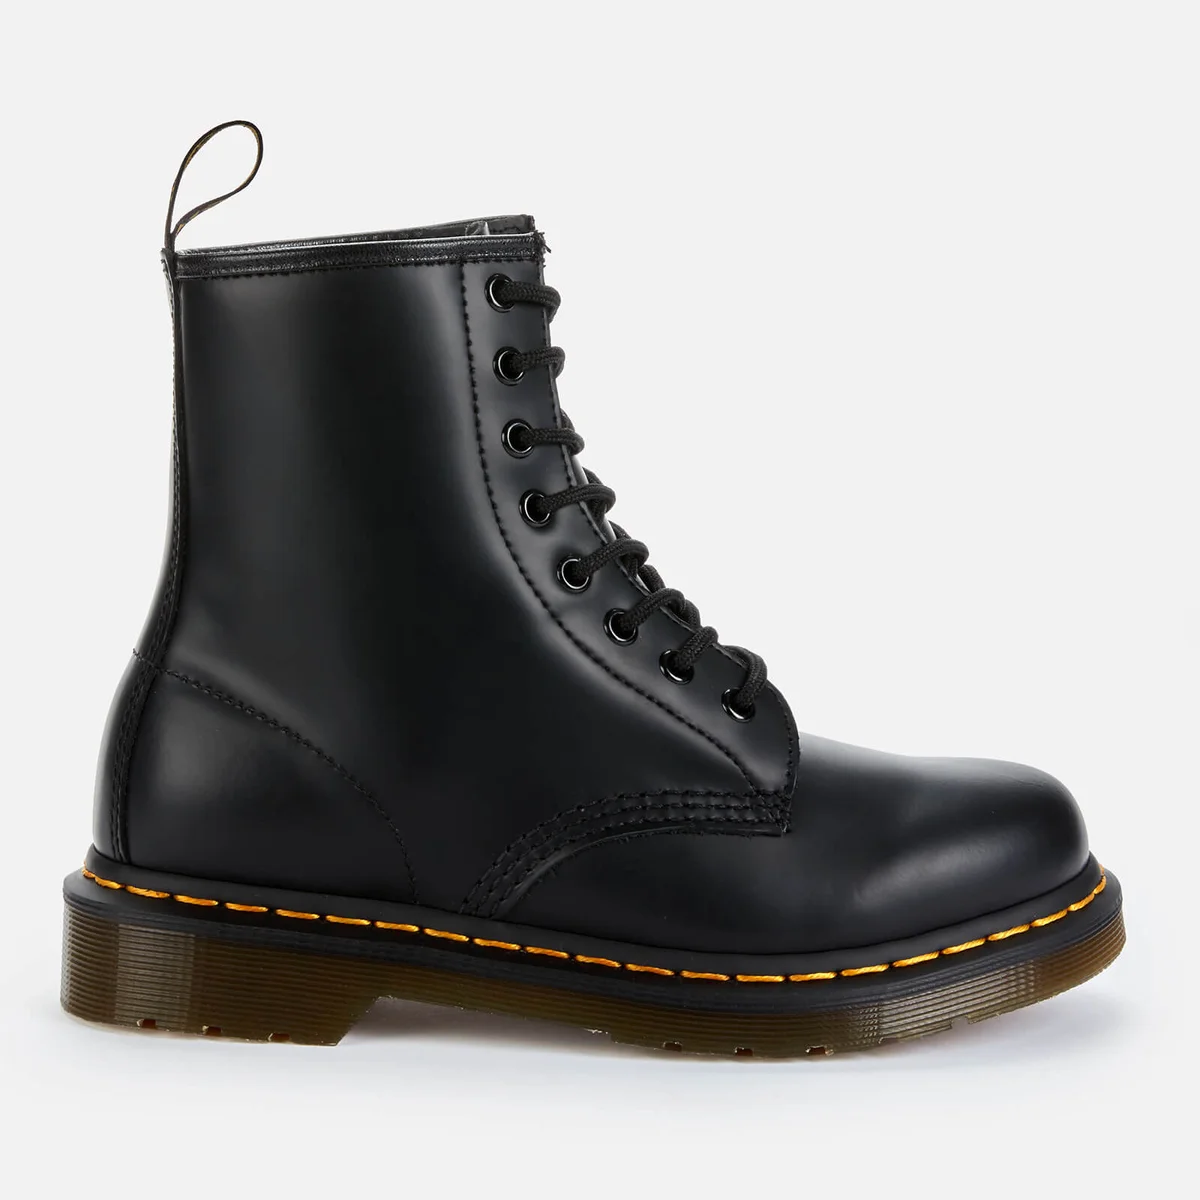 Dr. Martens 1460 Smooth Leather 8-Eye Boots - Black Image 1